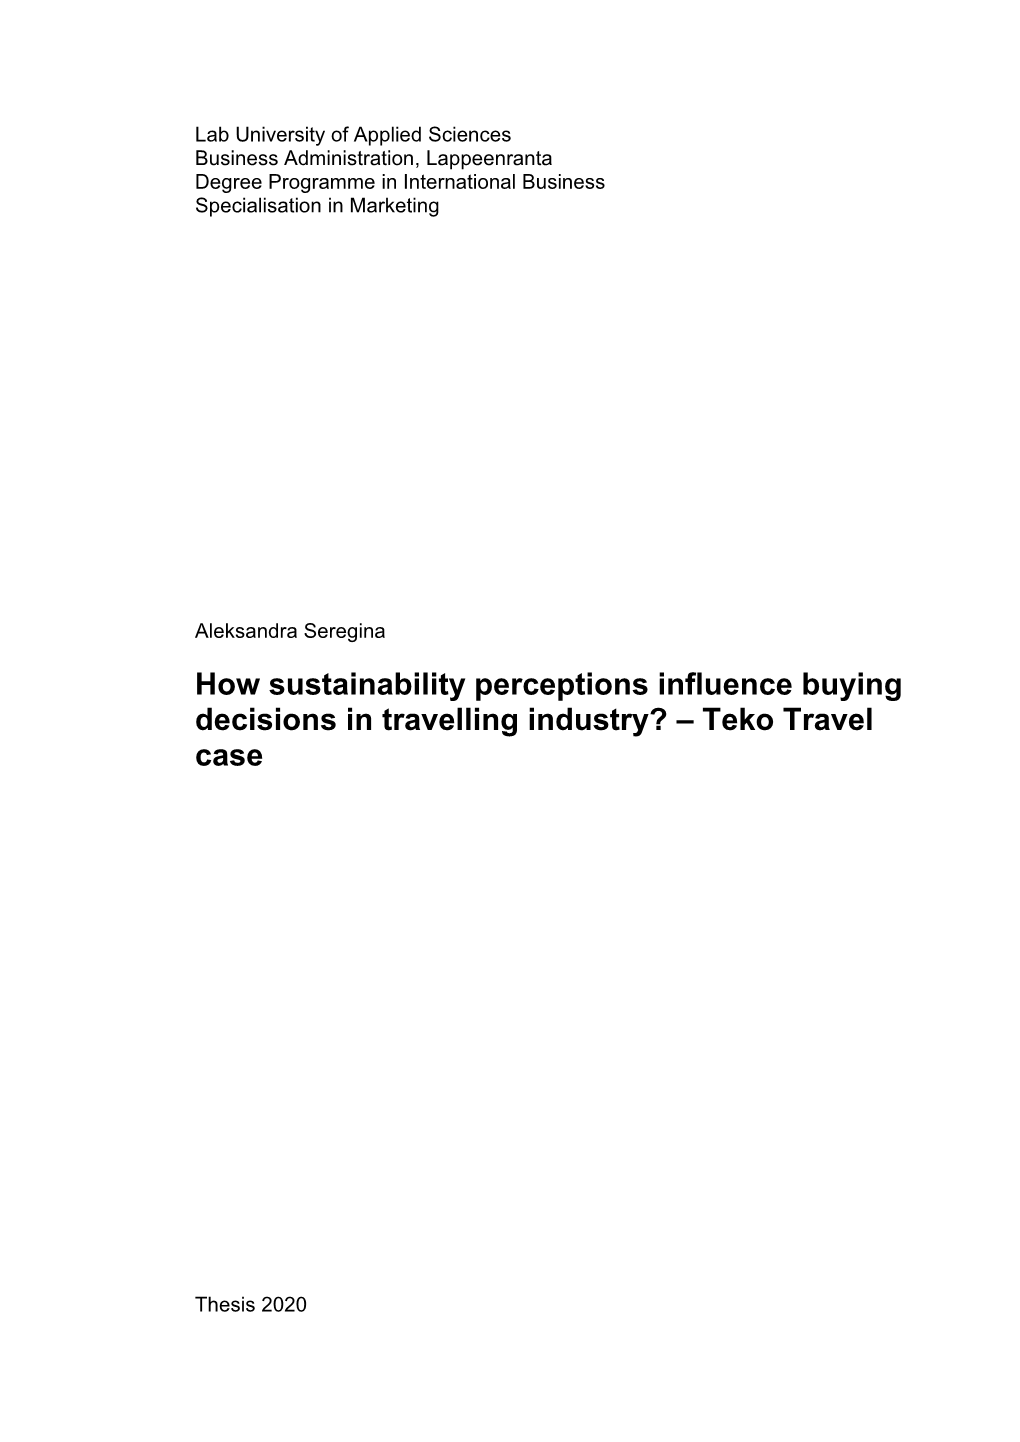 How Sustainability Perceptions Influence Buying Decisions in Travelling Industry? – Teko Travel Case